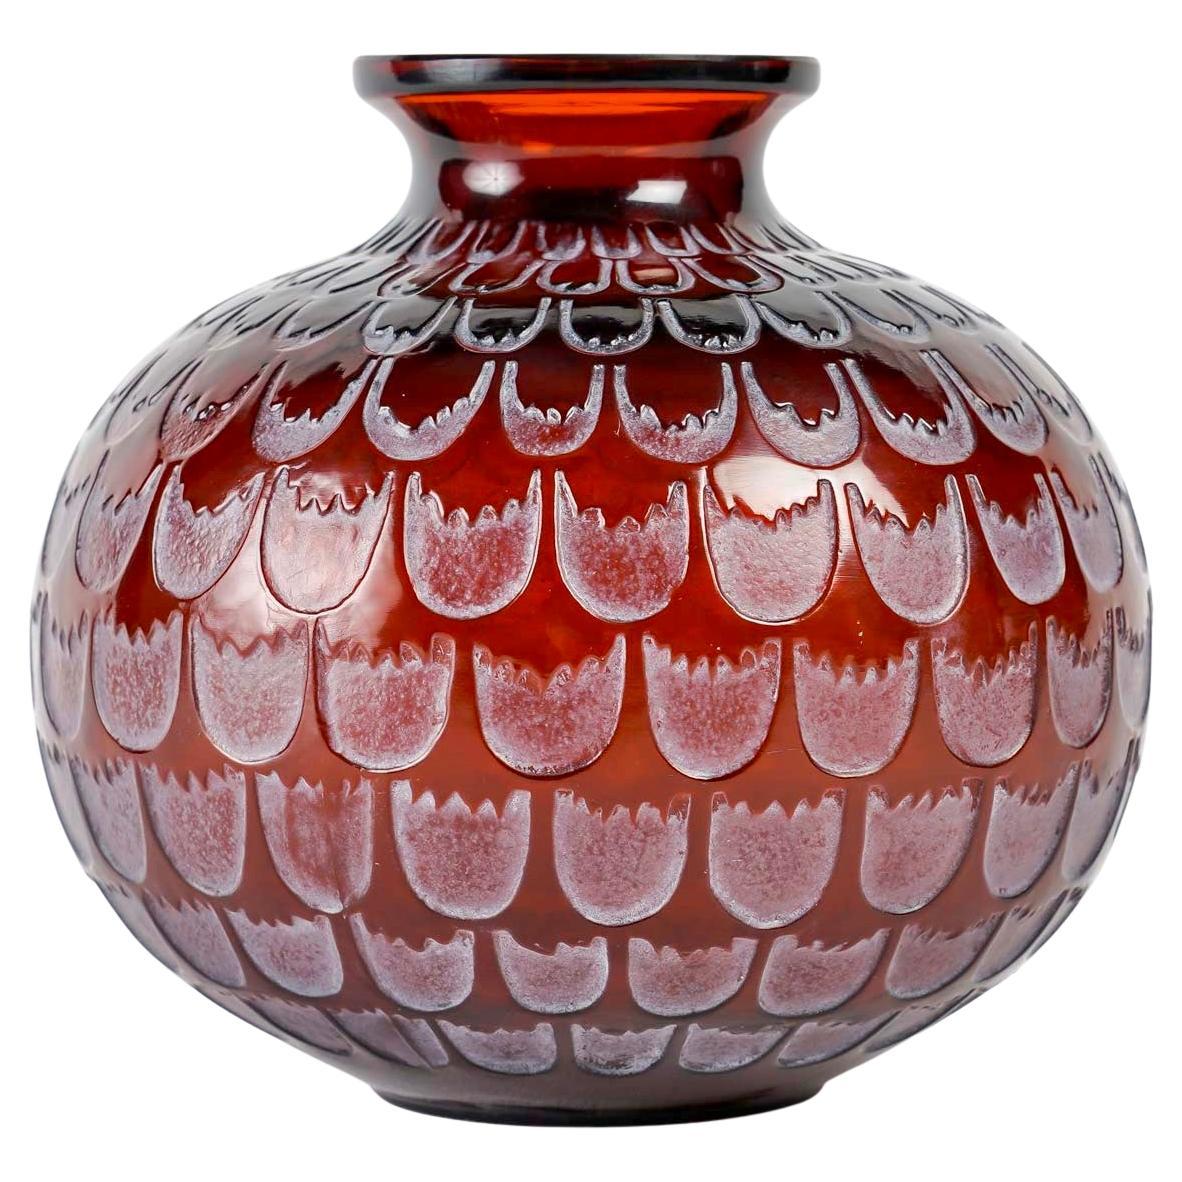 1930 Rene Lalique Vase Grenade Red Amber Glass with White Patina For Sale